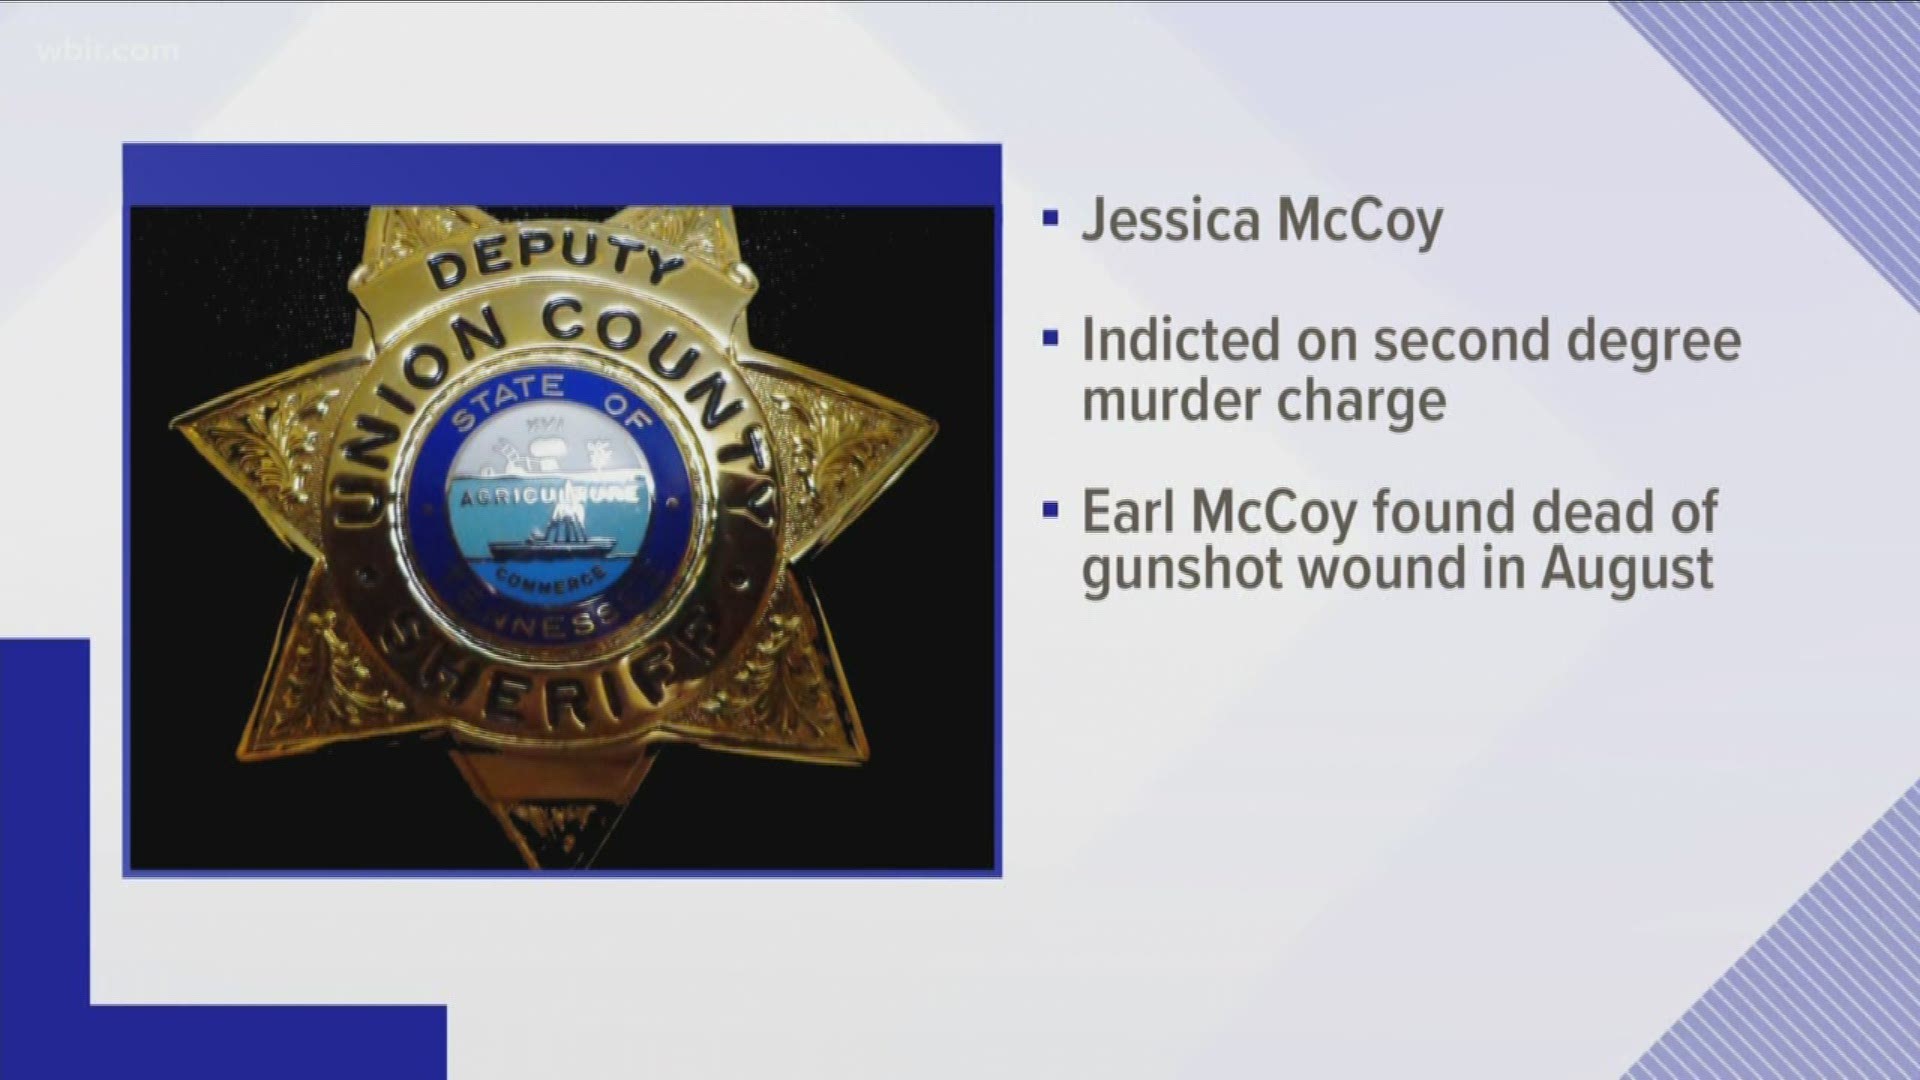 Jessica McCoy was indicted for killing Earl Darin McCoy on Friday, Nov. 8.